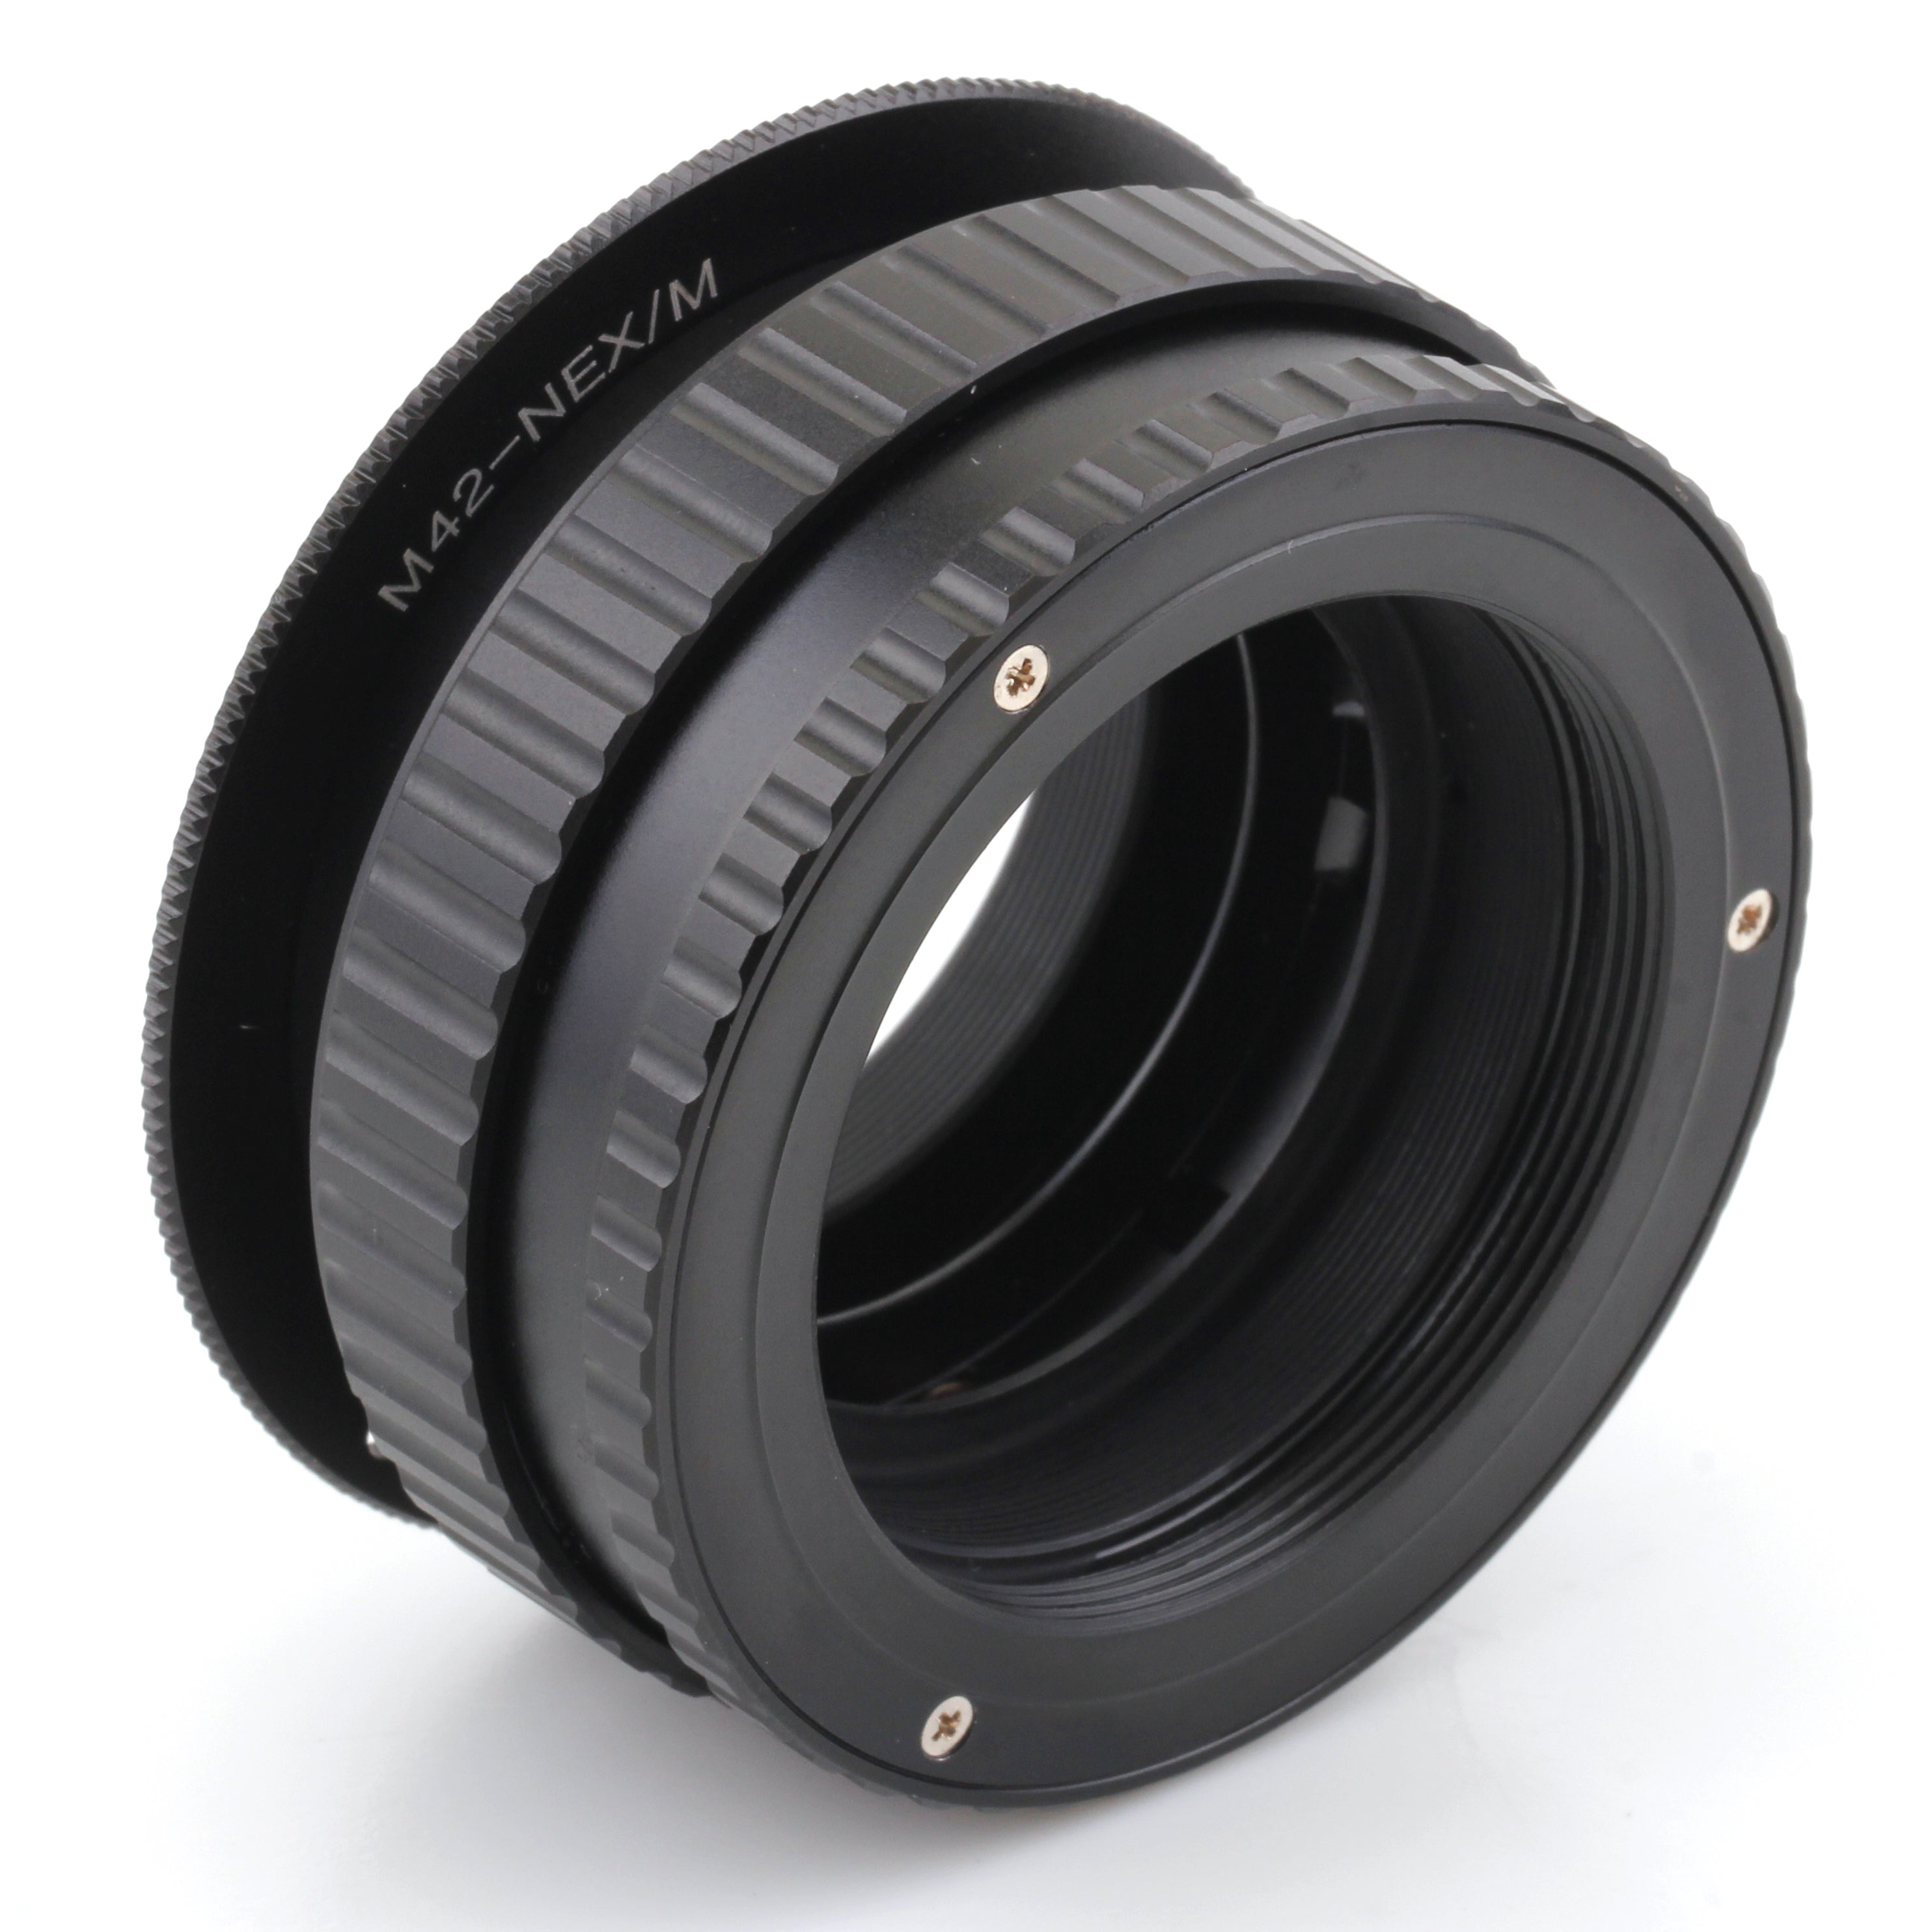 Super slim M42 screw mount lens to Sony E mount NEX adapter - for macro helicoid extension ring - NEX-7 A9 II A7 IV A6500